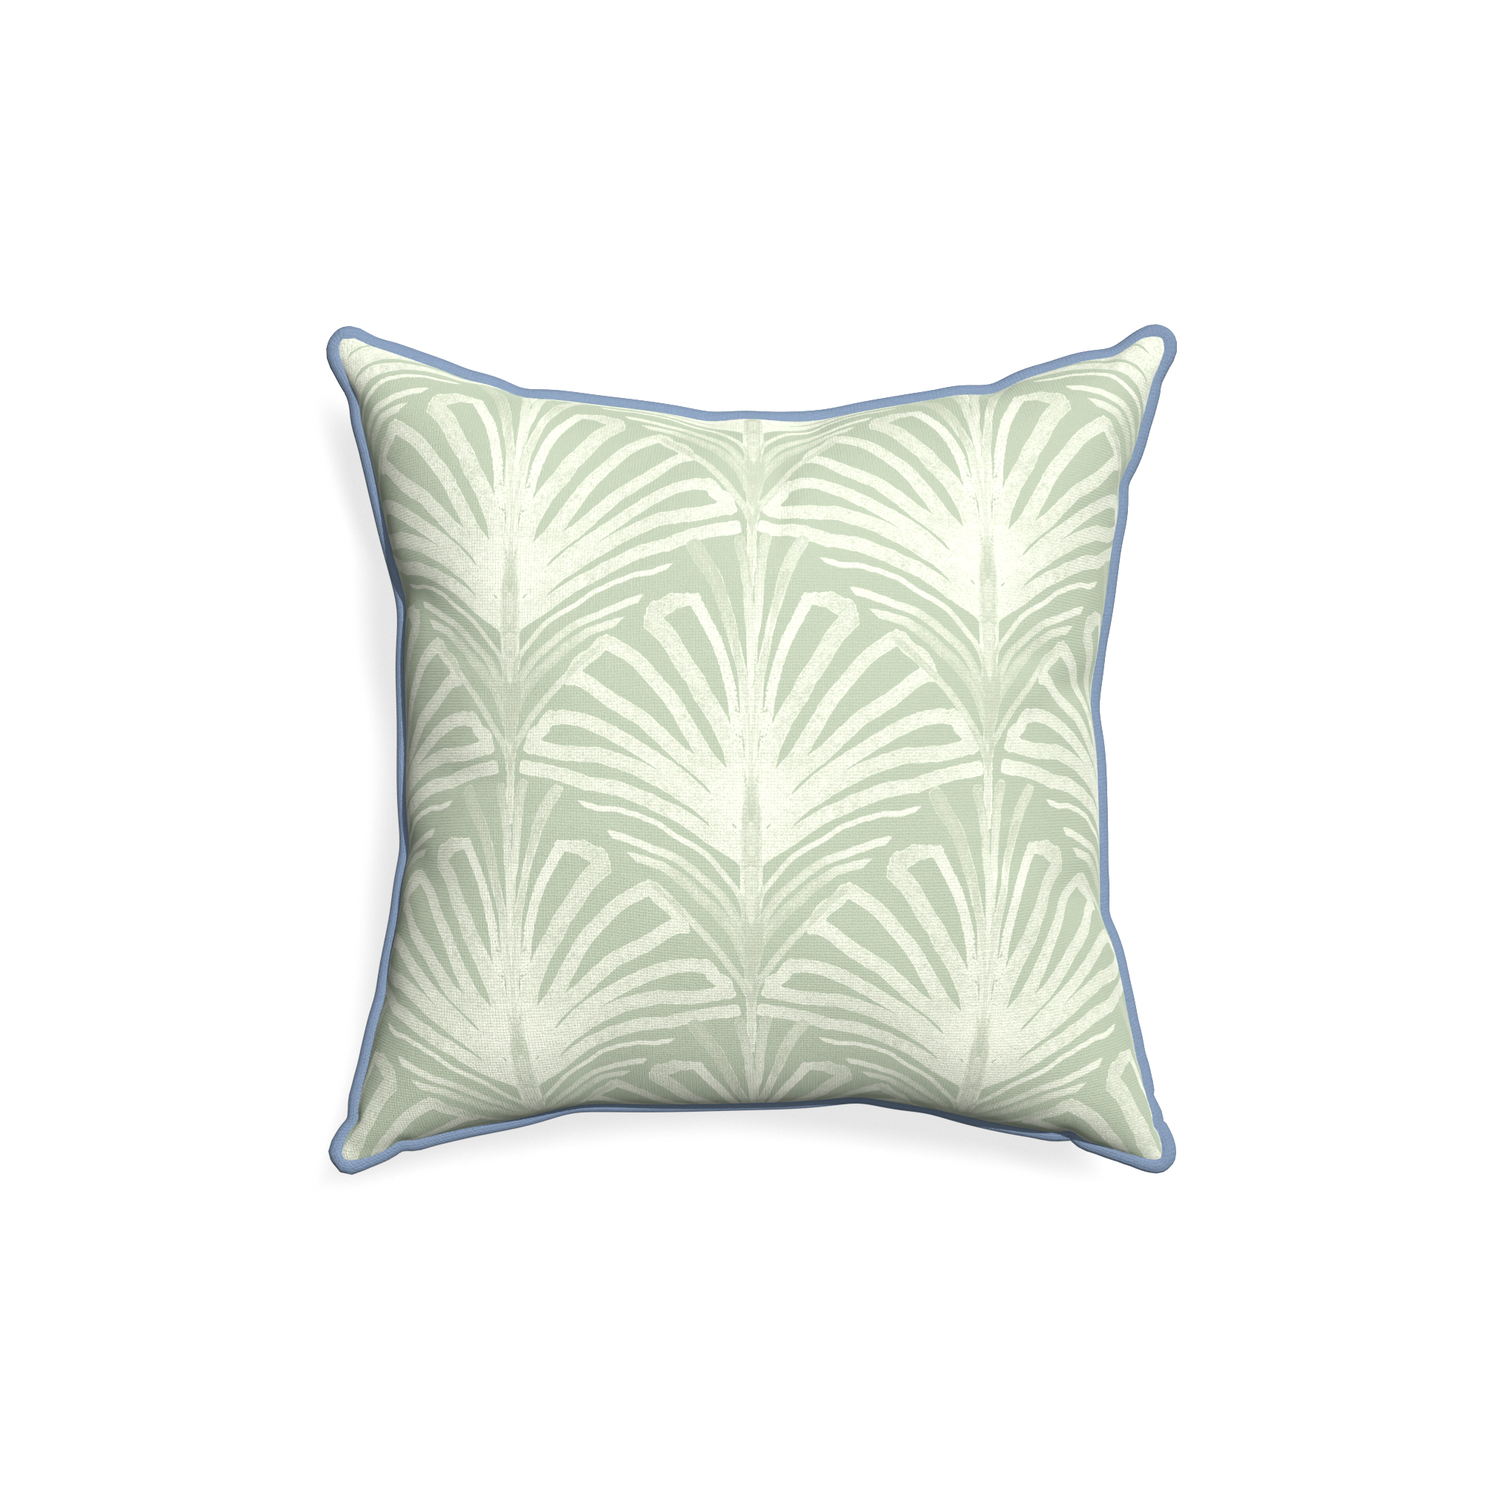 18-square suzy sage custom sage green palmpillow with sky piping on white background